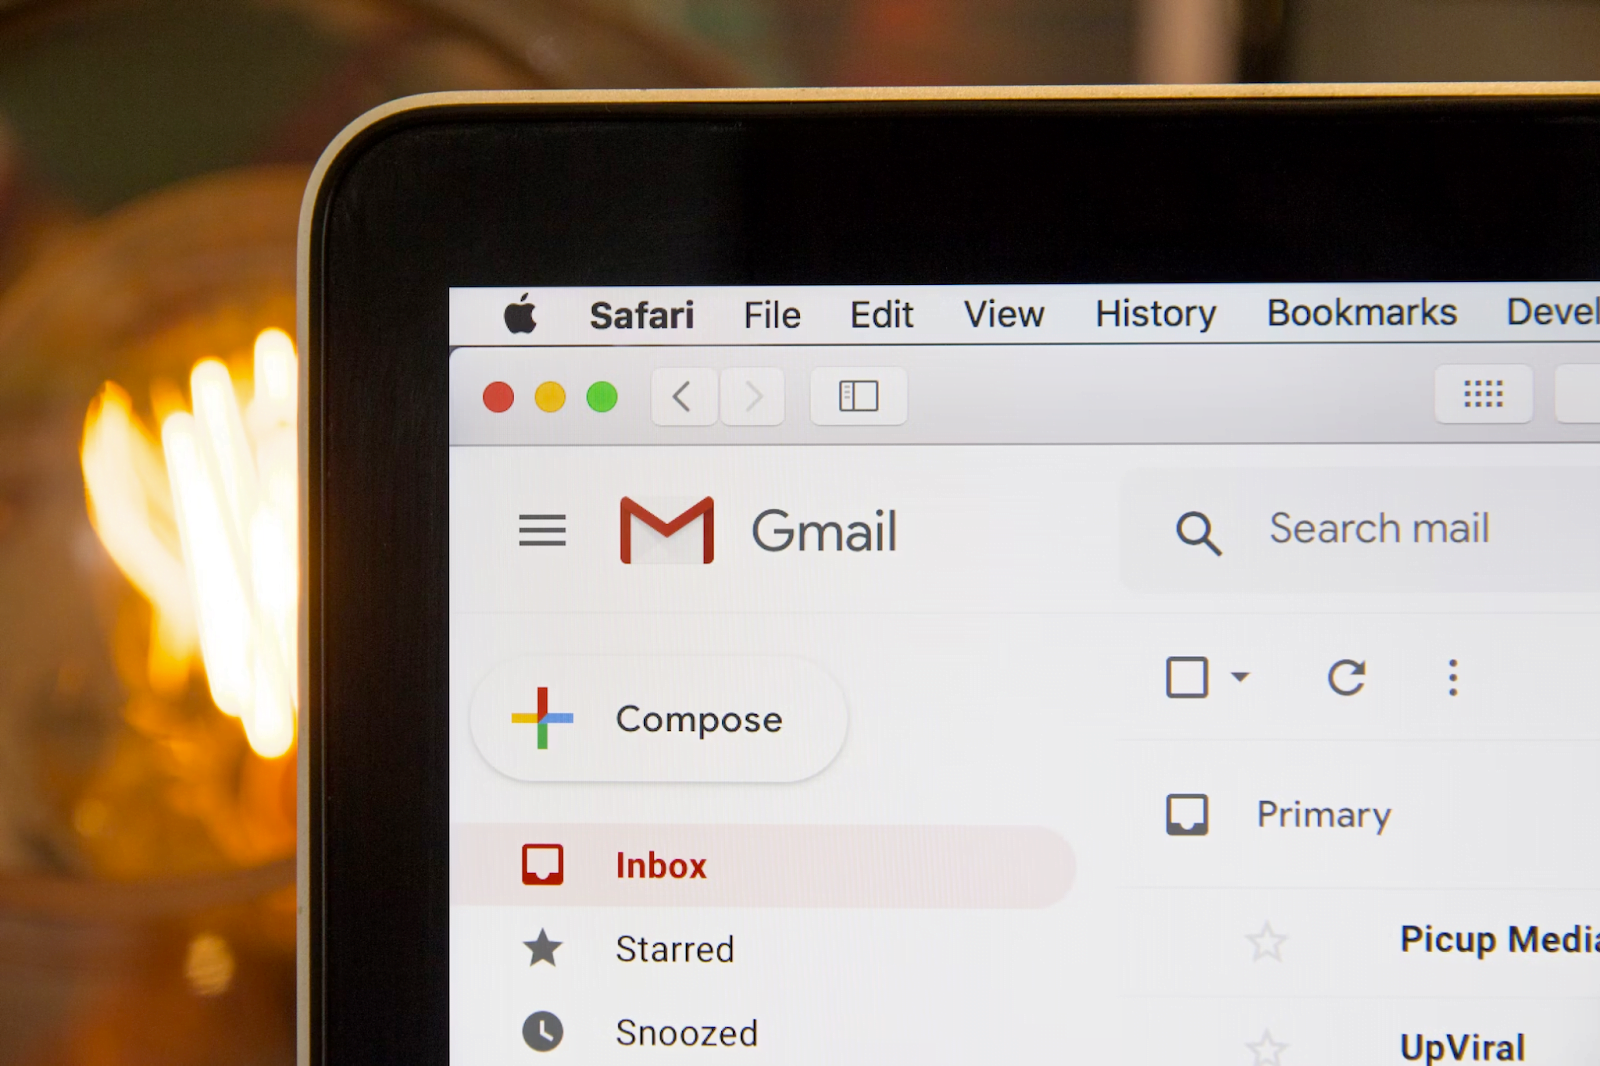 Gmail inbox opened in Safari browser on a computer screen, with 'Compose' and other email folders visible, and soft glowing lights in the background.